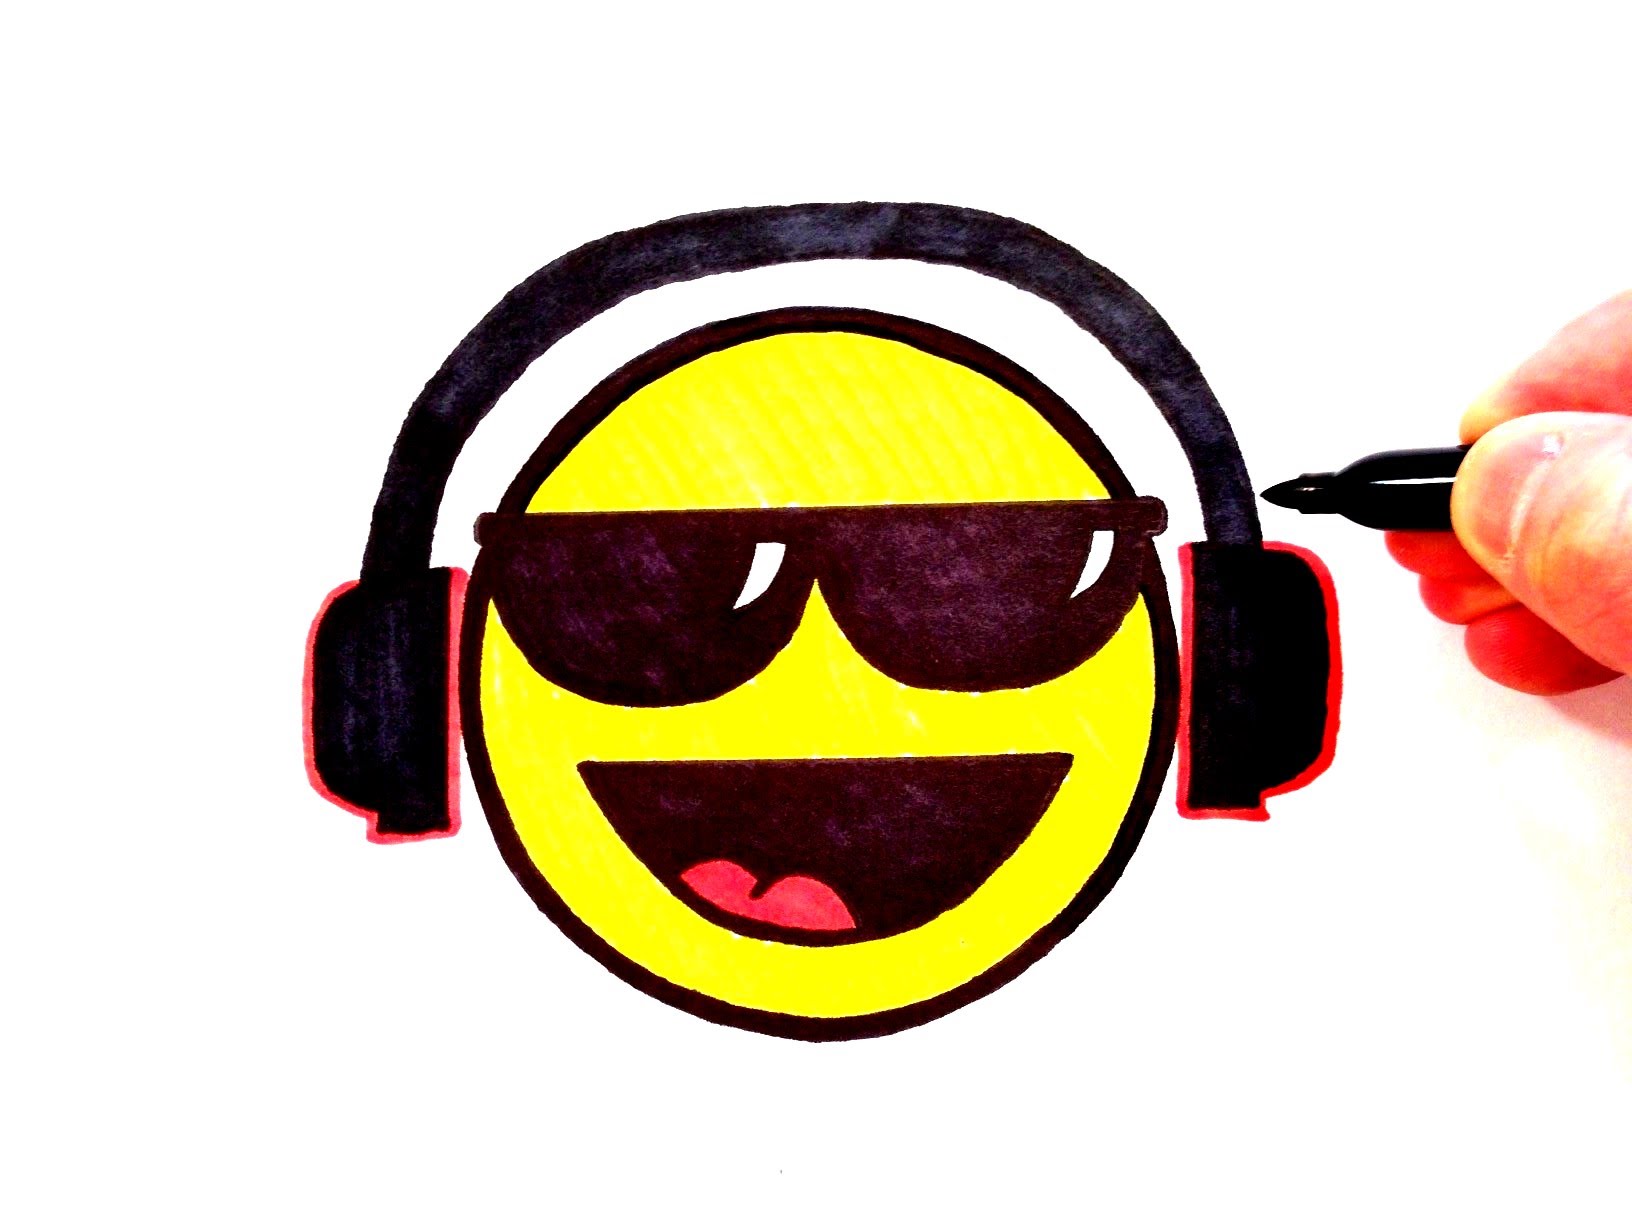 1632x1224 How To Draw A Cool Smiley Face With Sunglasses And Head Phones.